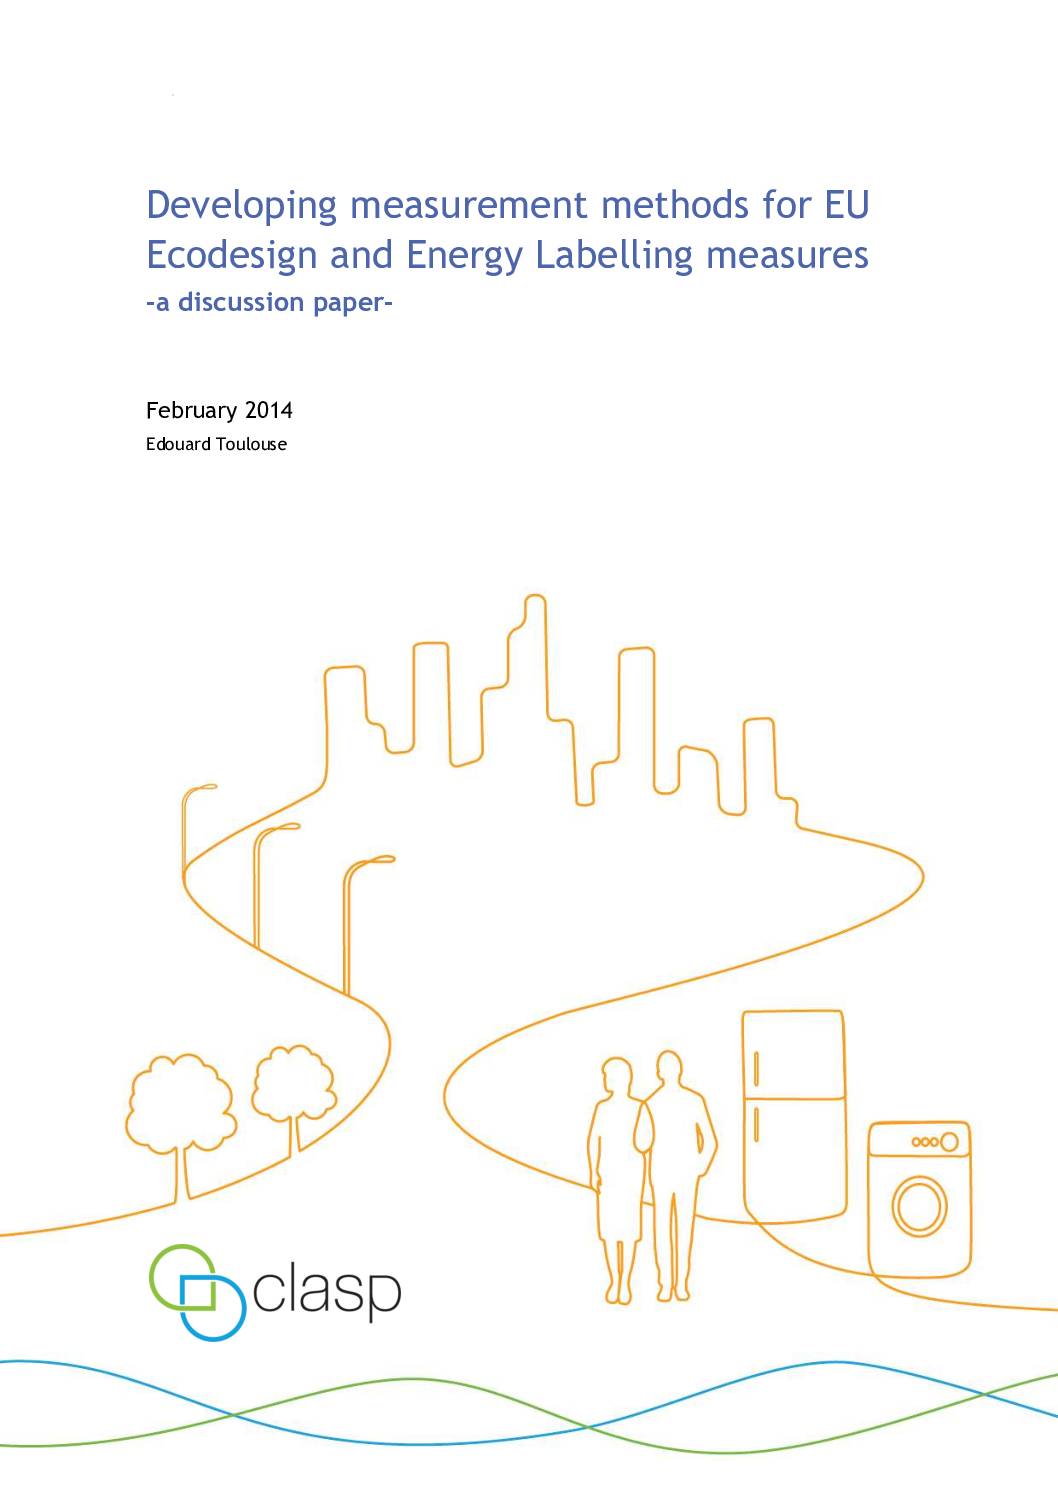 Developing measurement methods for EU Ecodesign and Energy Labelling measures:  A discussion paper